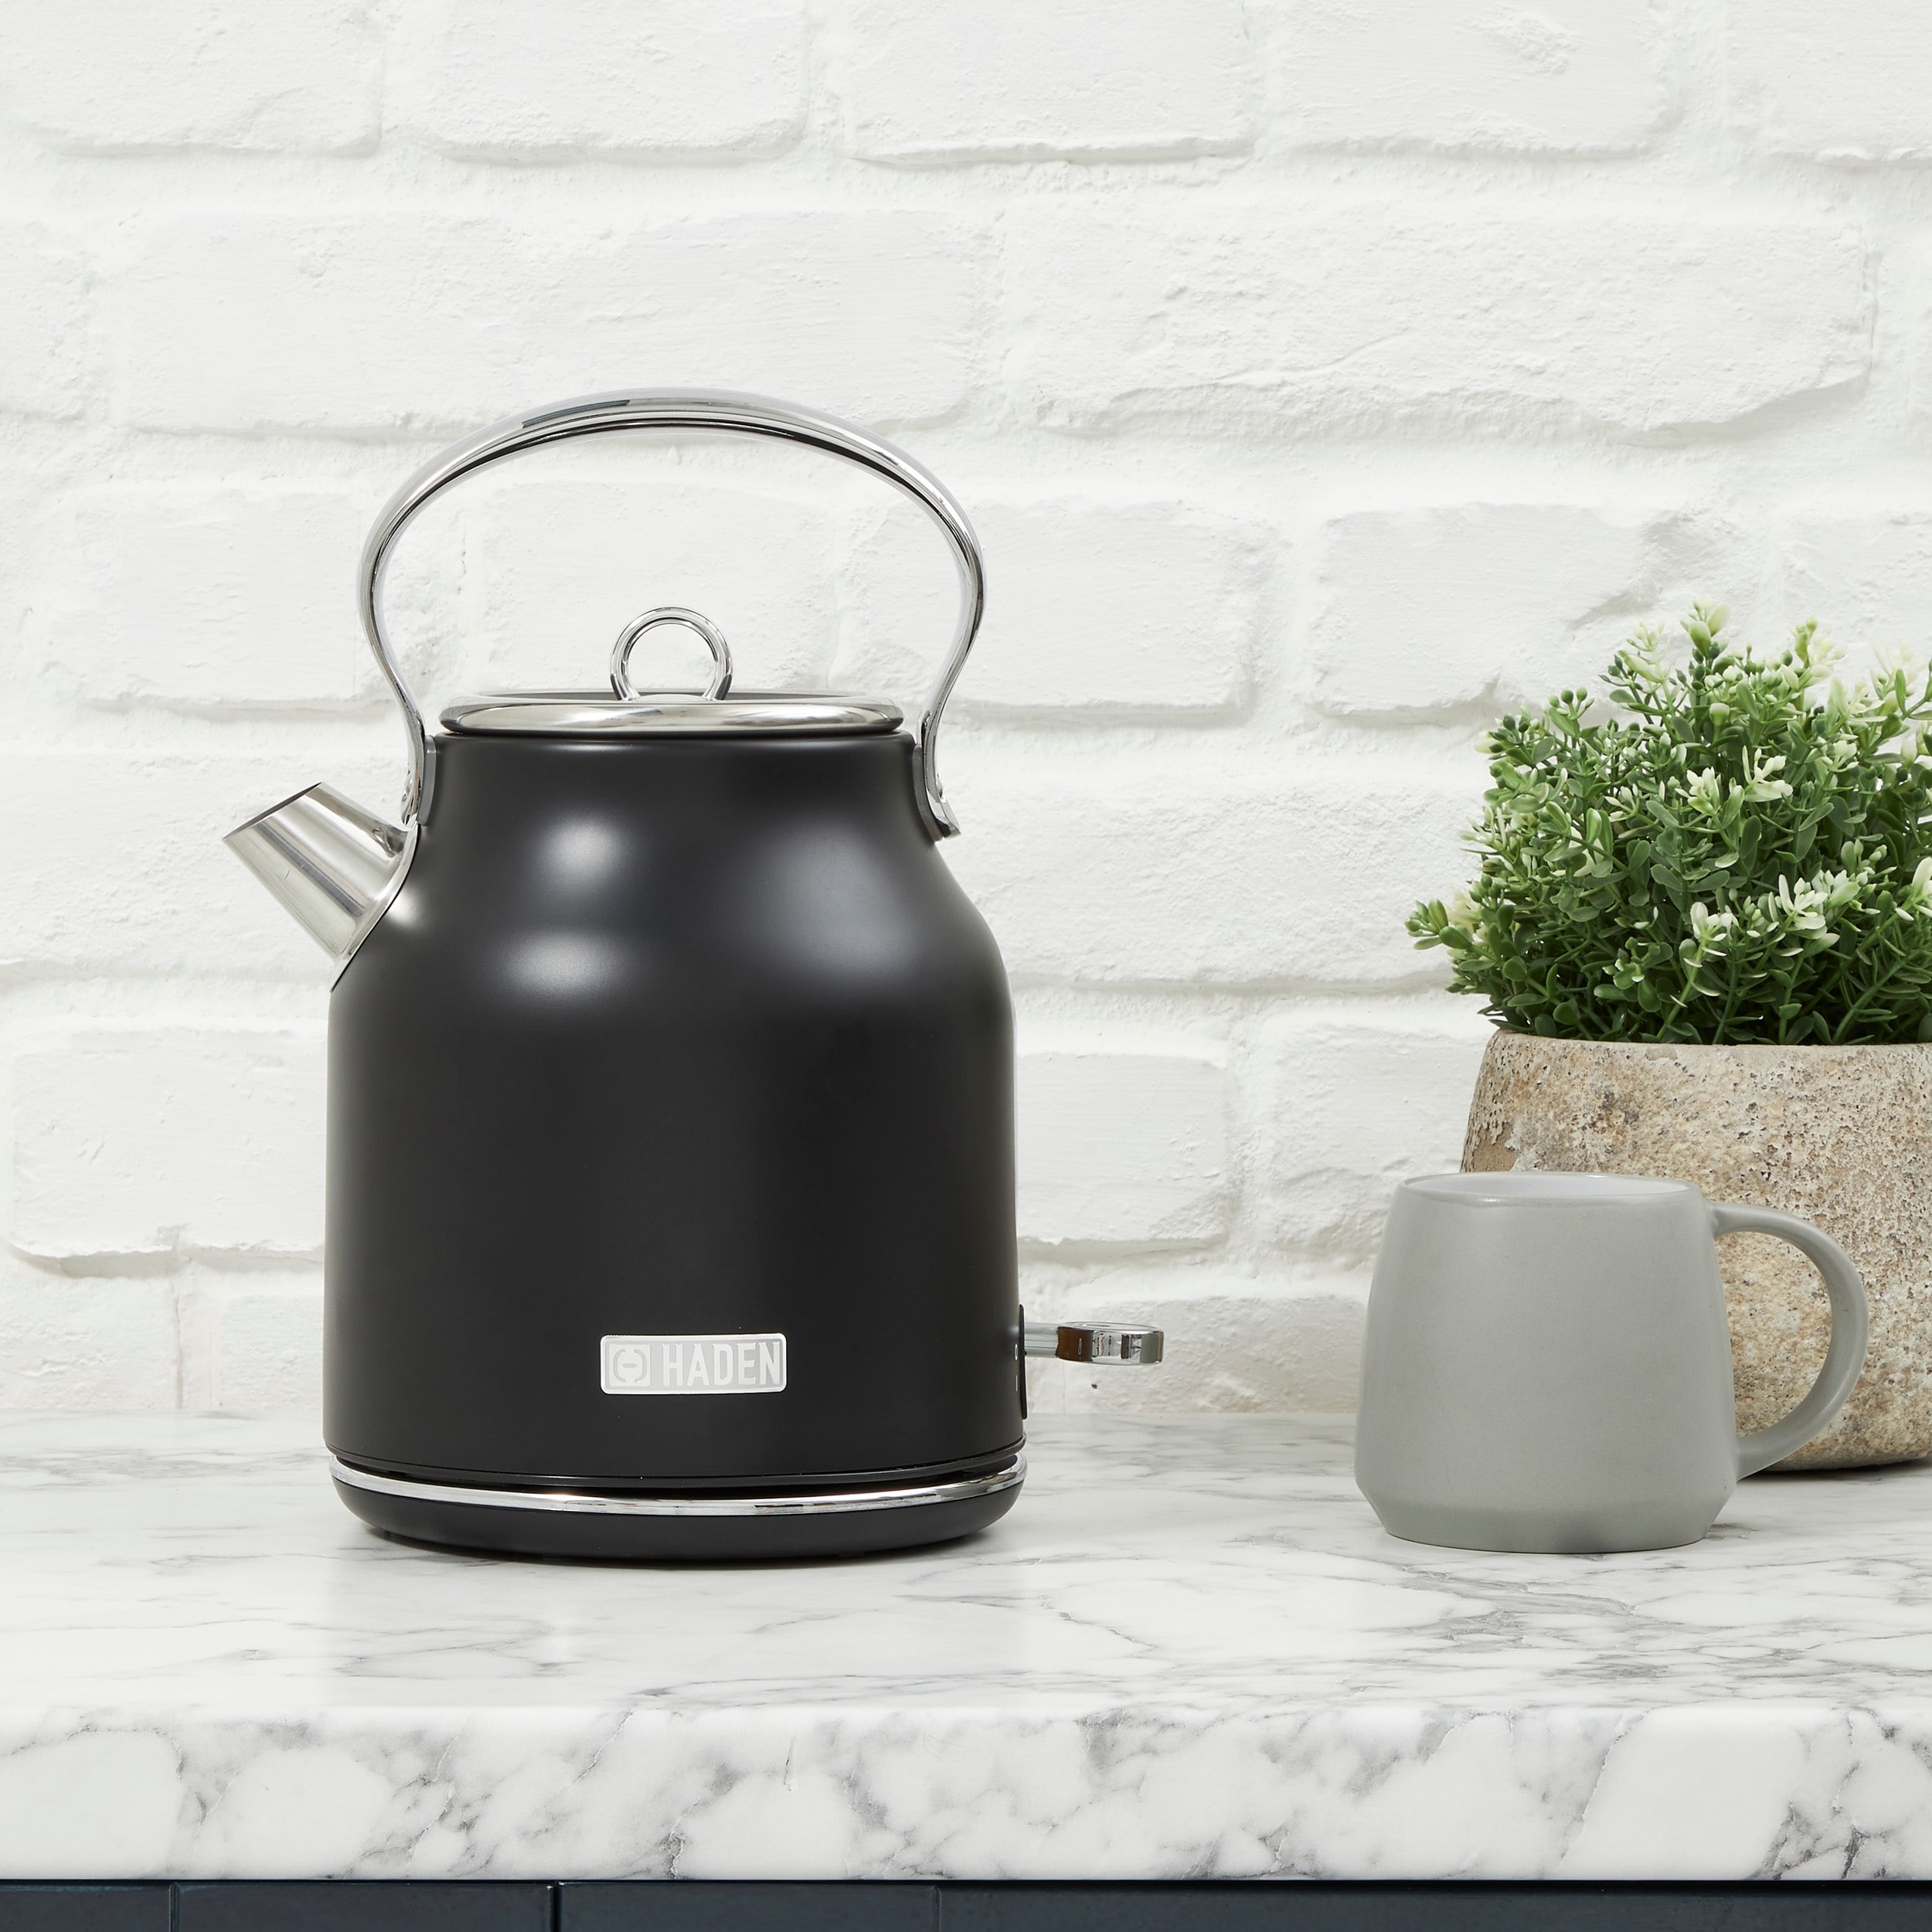 https://ak1.ostkcdn.com/images/products/is/images/direct/a0ddc75a48dfb16719ff5330a847cd32466271d0/Haden-Heritage-1.7-Liter-Stainless-Steel-Electric-Tea-Kettle.jpg